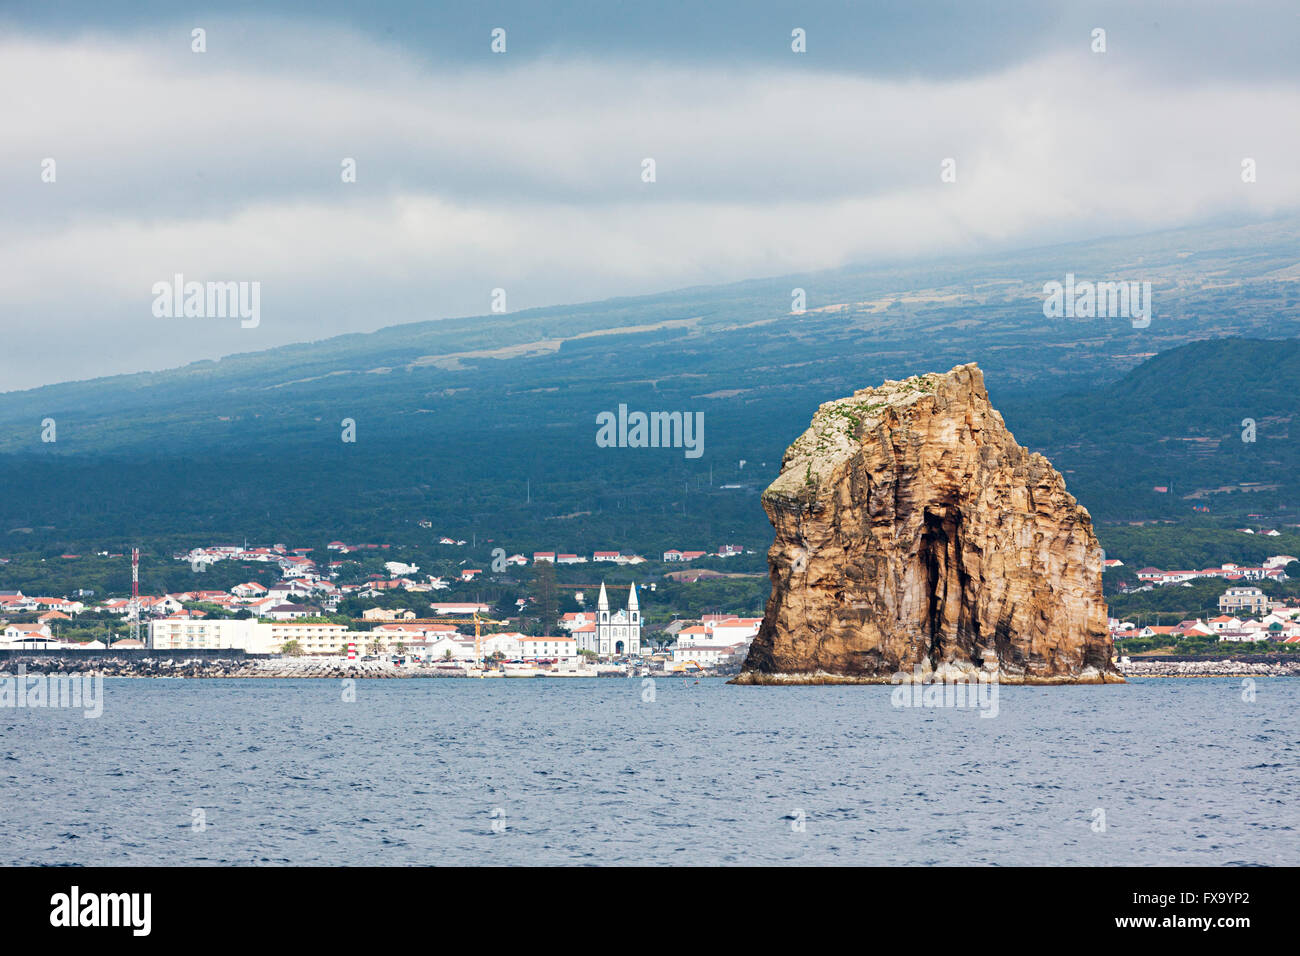 Large monolithic rock at the harbor entrance of Horta, Faial, Azores Stock Photo